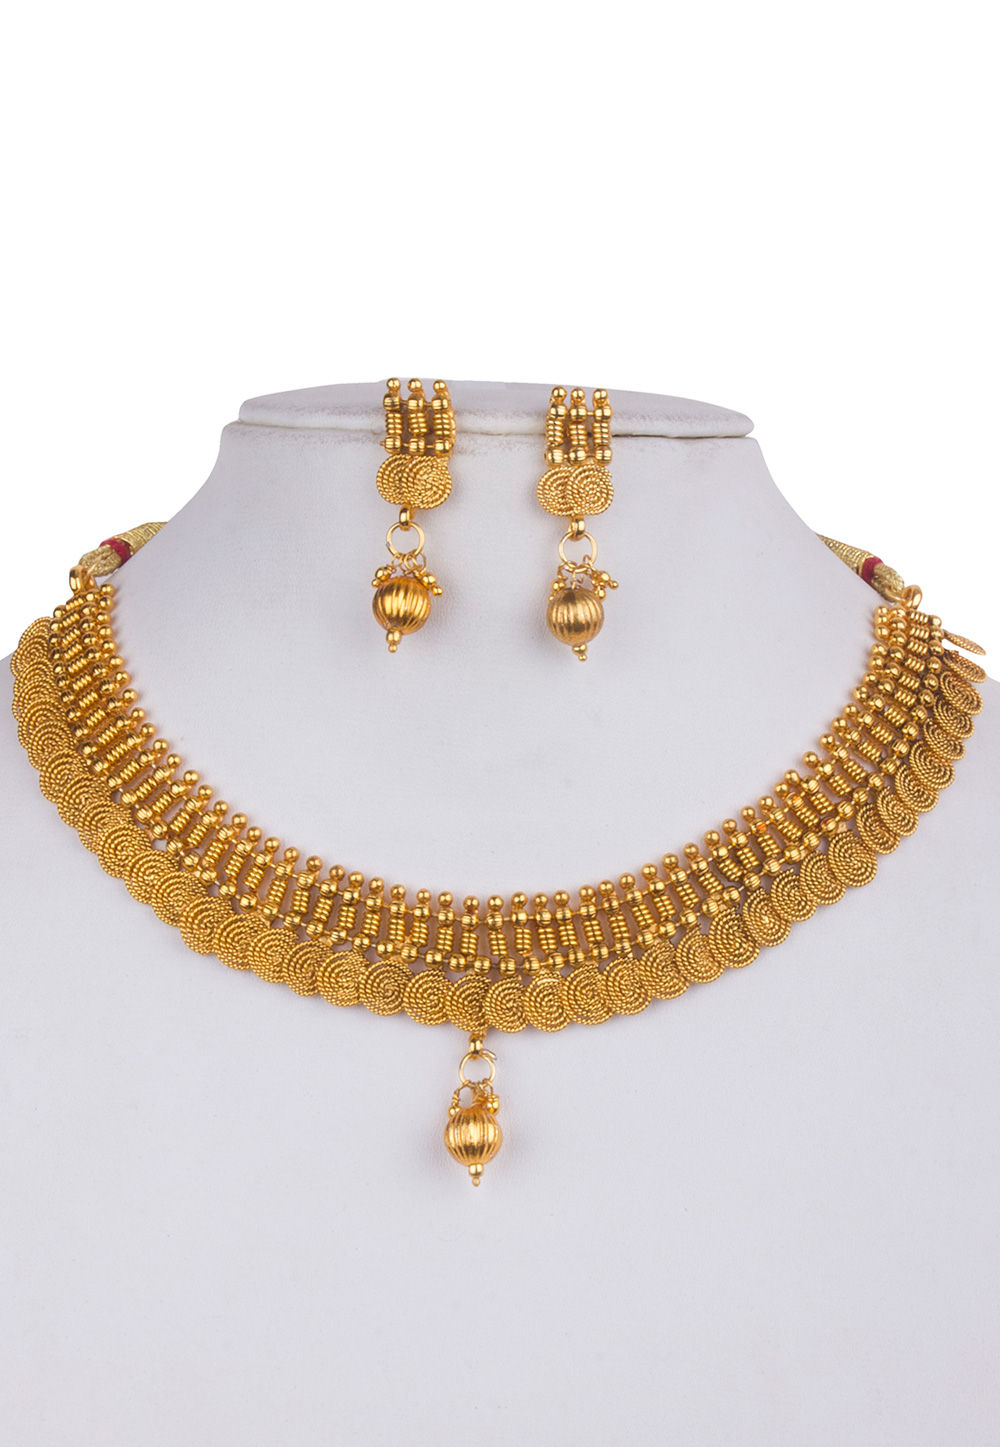 Golden Alloy Kundan Necklace With Earrings 156257